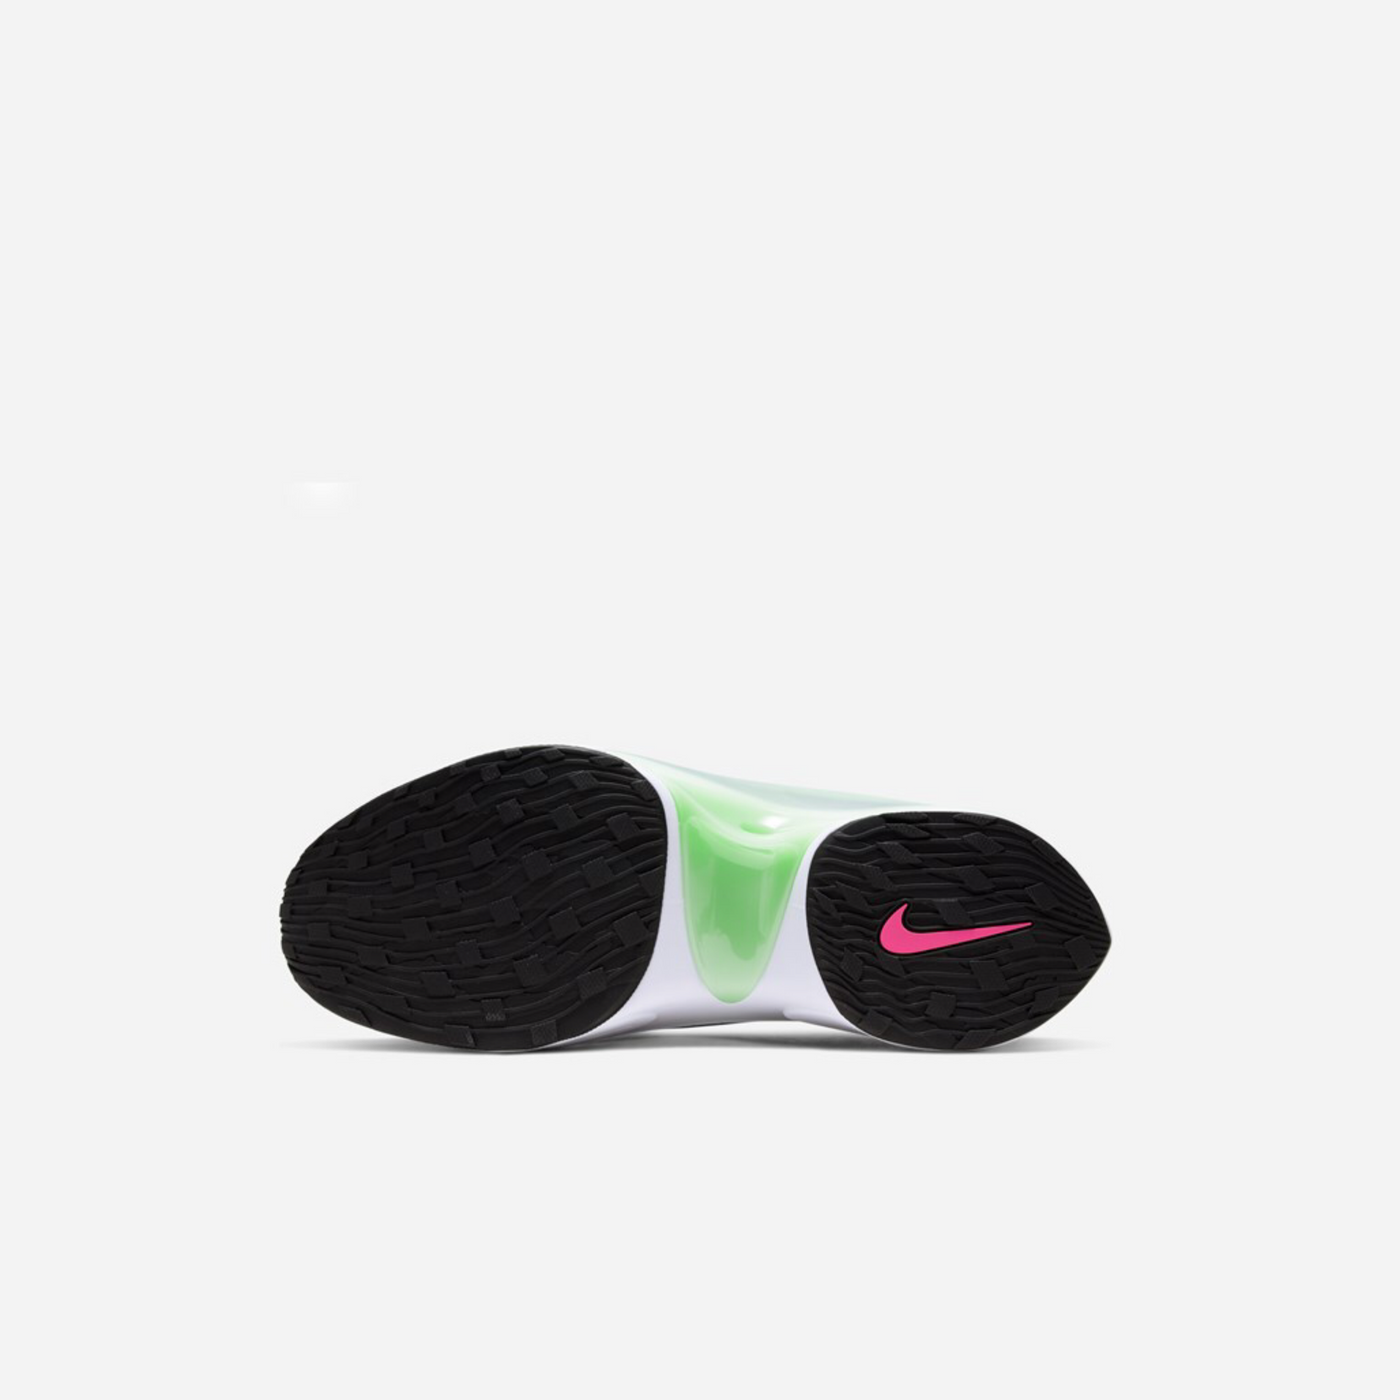 AT5303-200 Nike Signal D/MS/X Pumice/Racer Pink